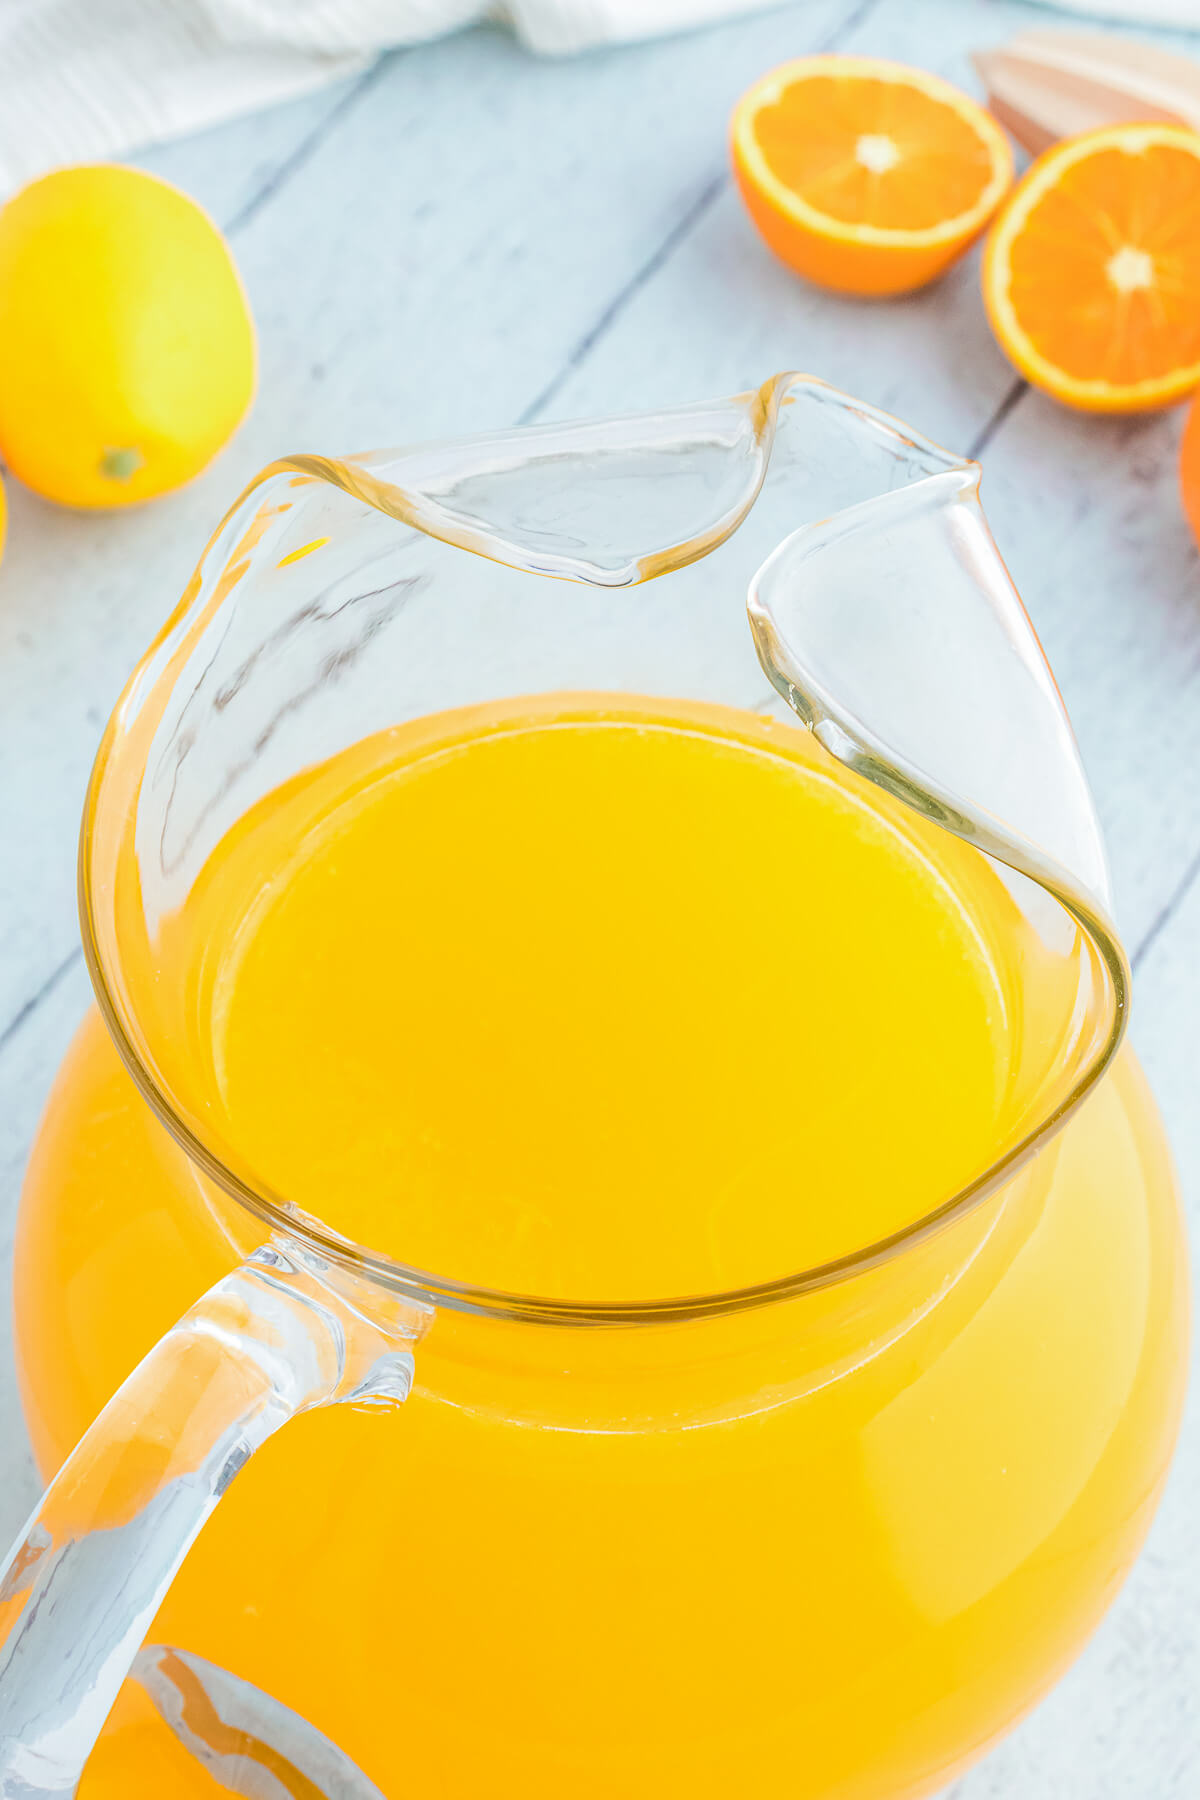 A glass pitcher filled with vibrant homemade orangeade.